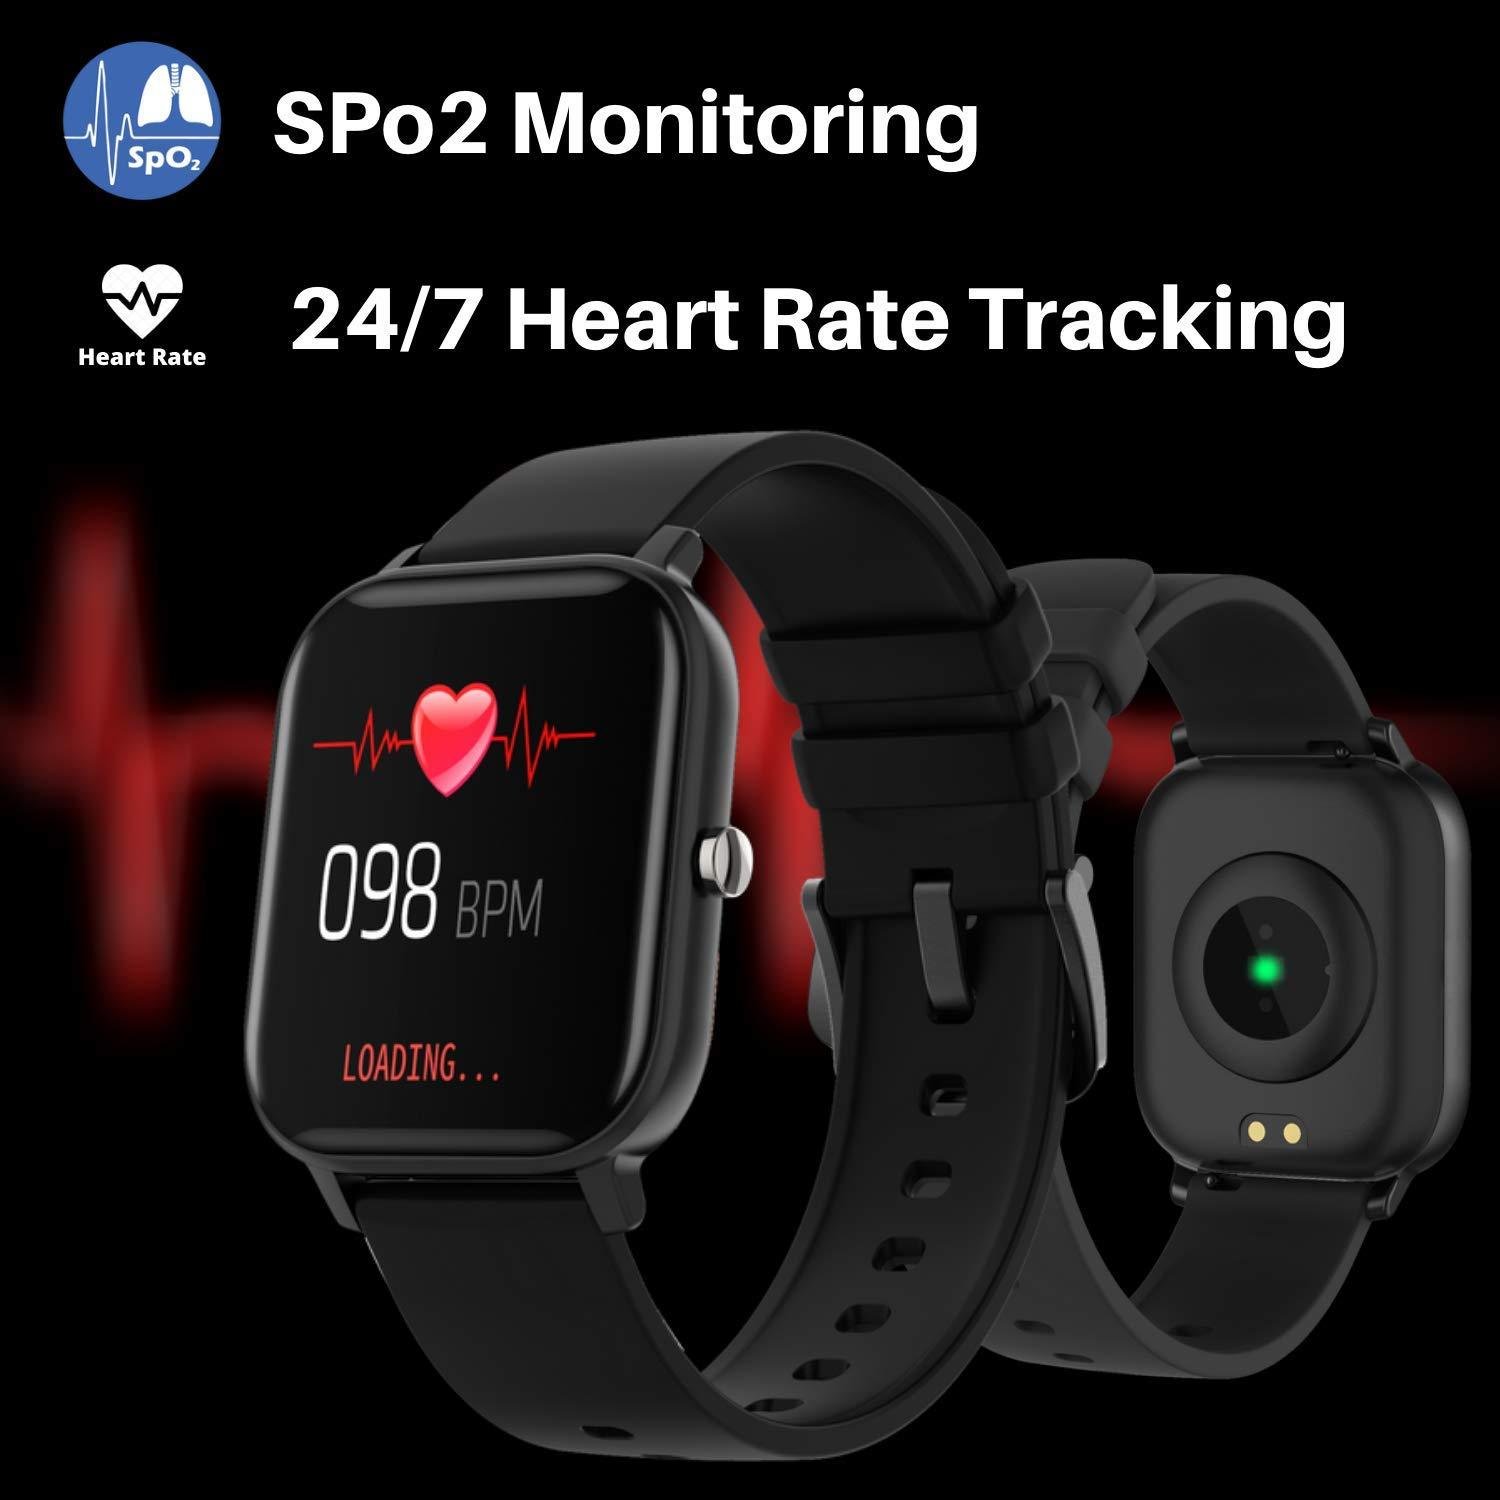 Fire-Boltt Full Touch Smart Watch with SPO2, Heart Rate, BP, Fitness and Sports Tracking - 1’4 inch high Resolution Display